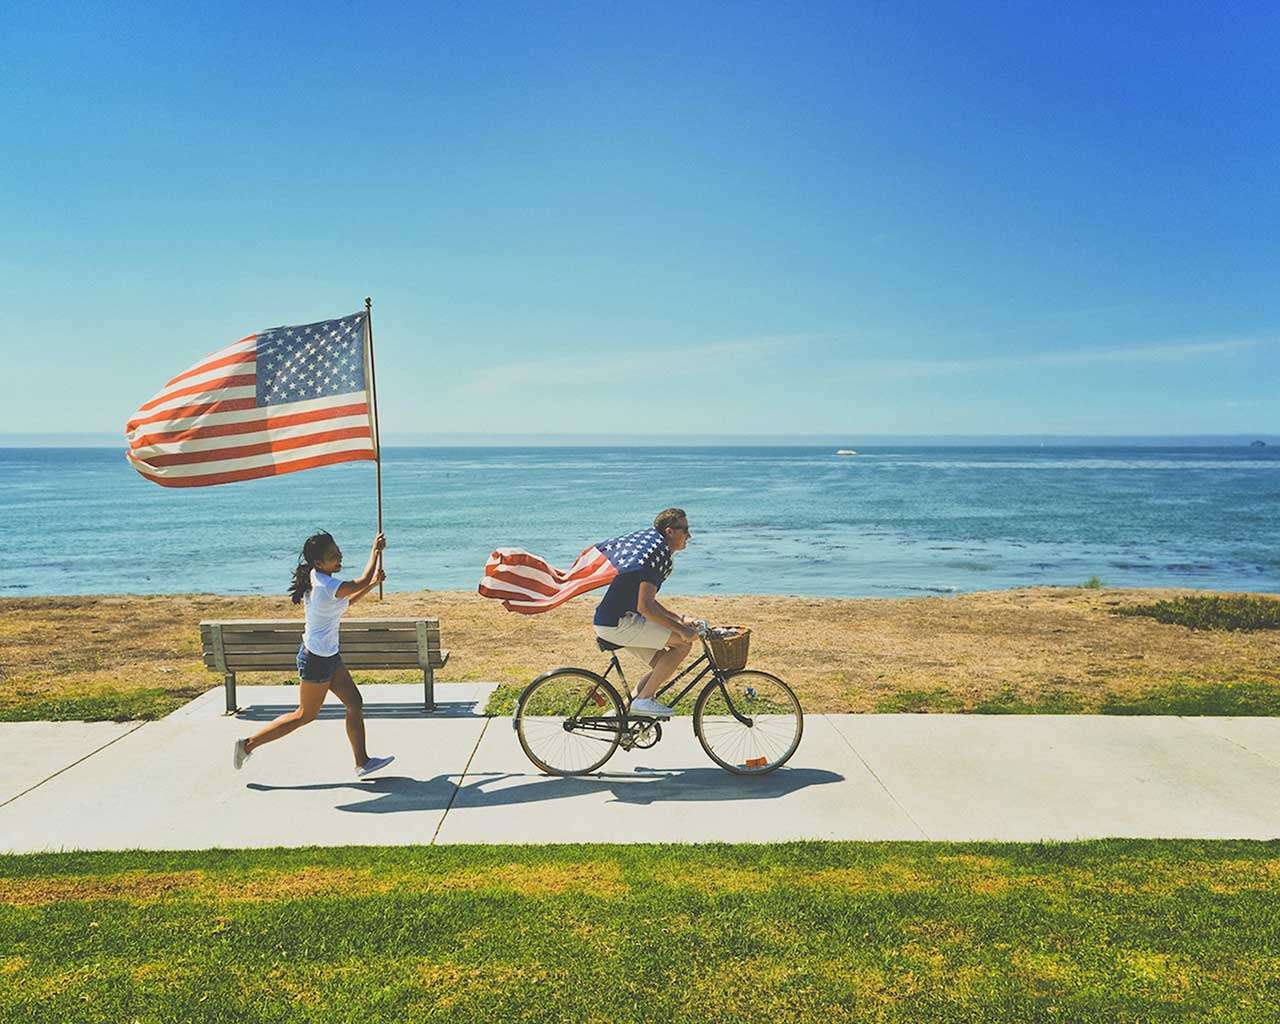 Man riding bike and woman running holding flag of USA